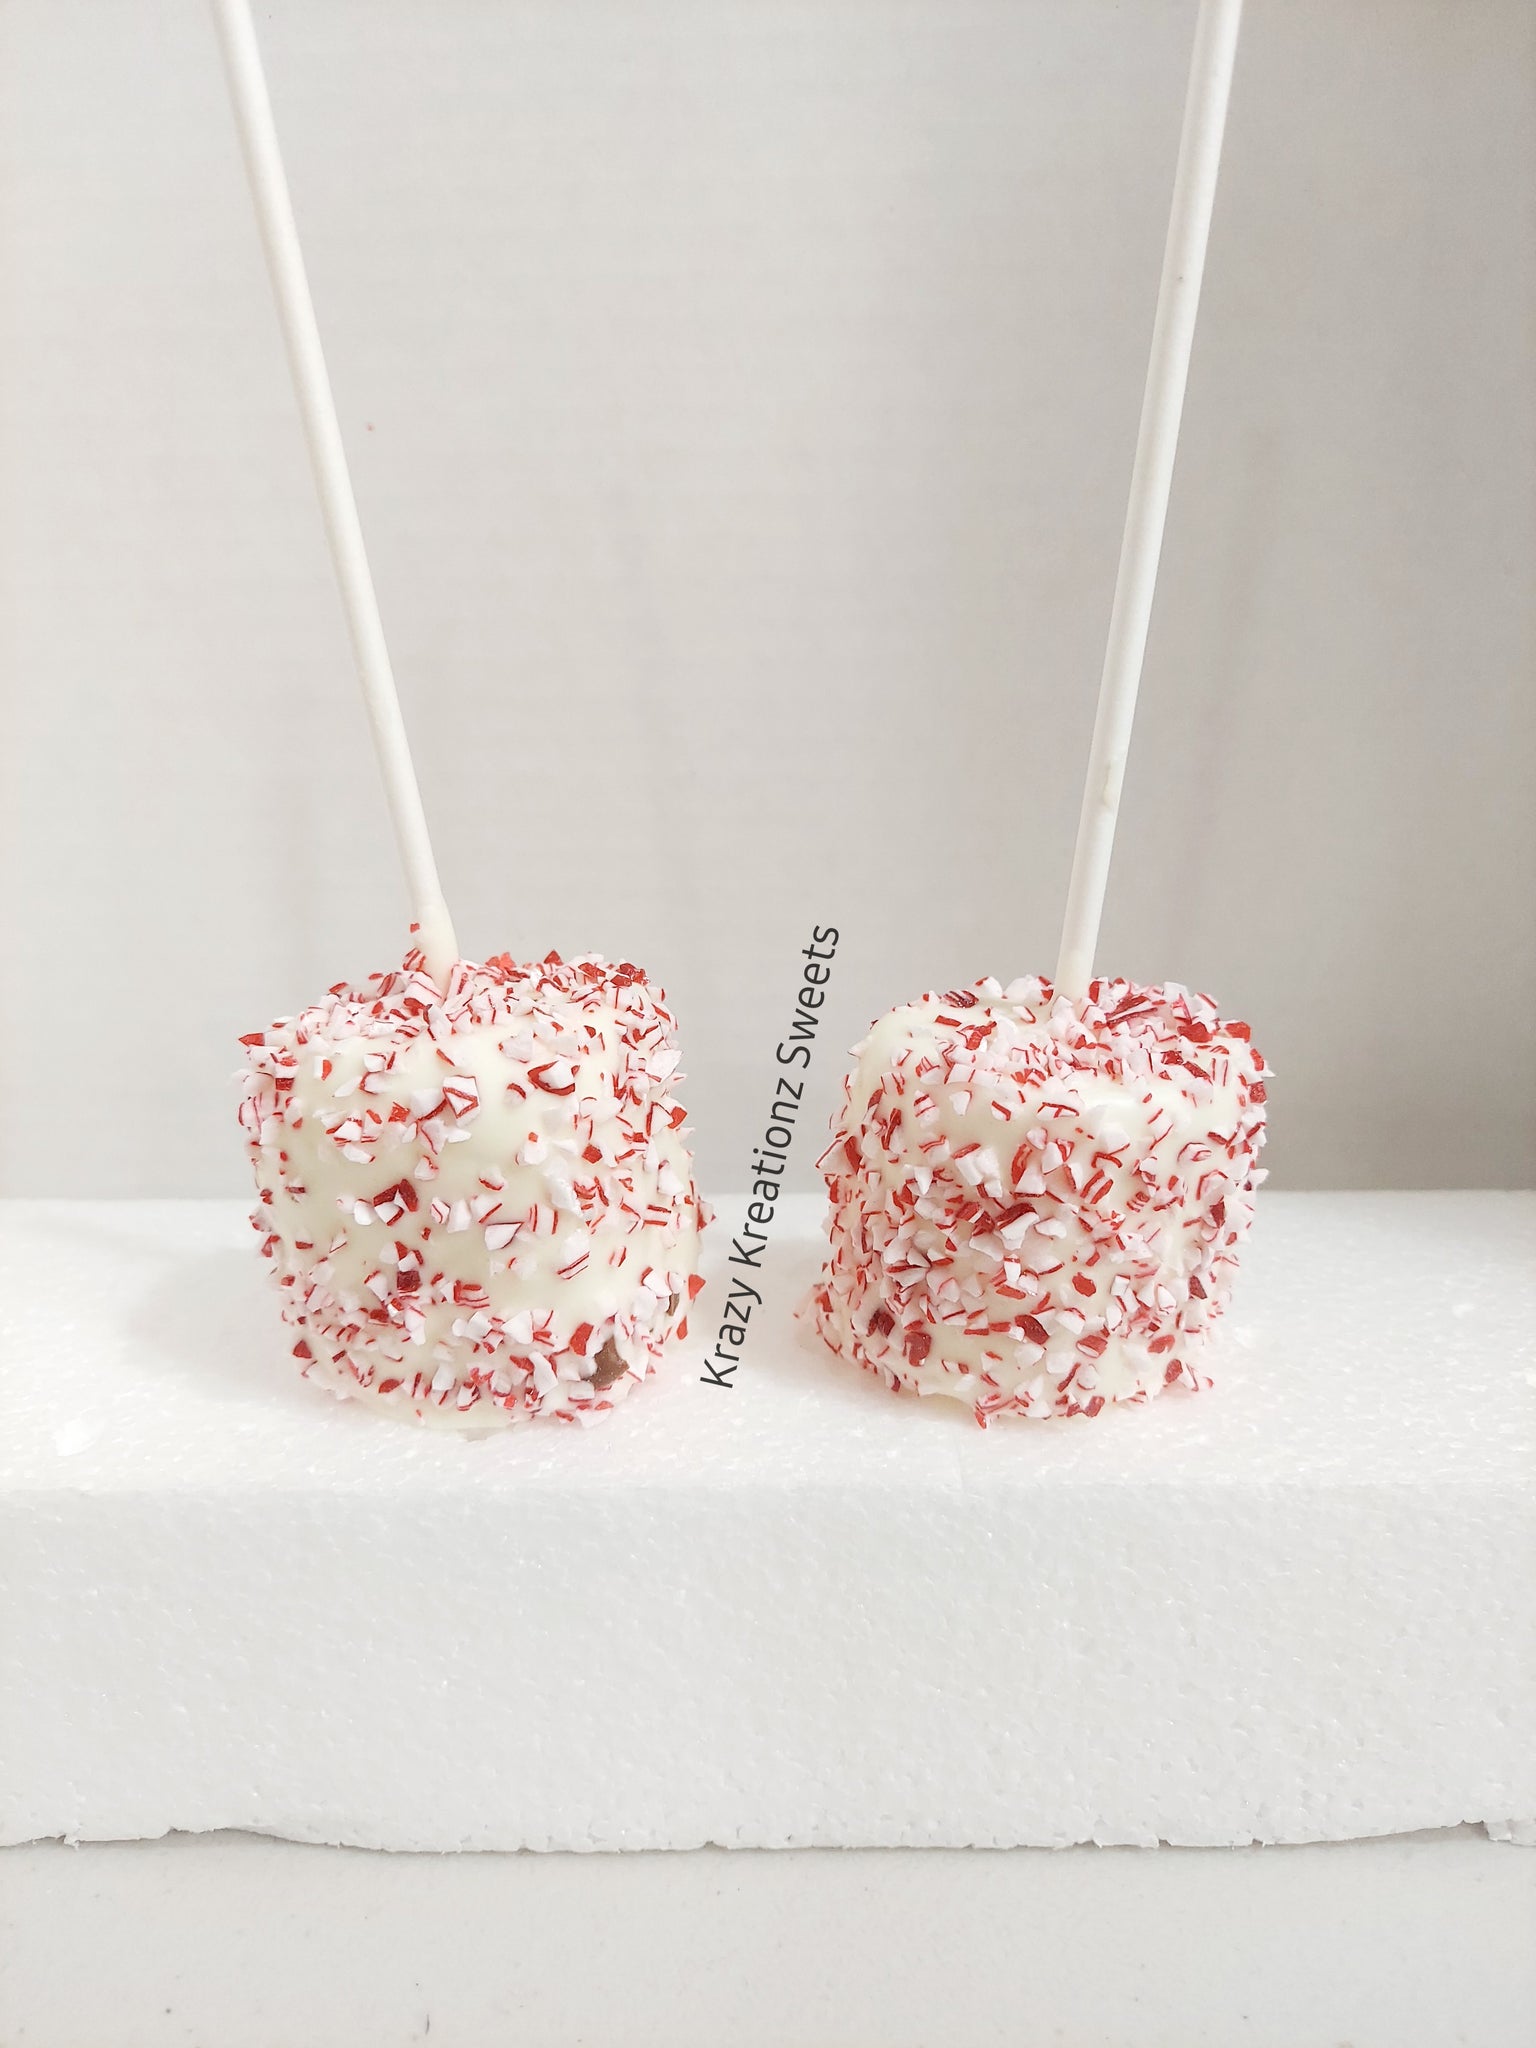 Jumbo Peppermint Chocolate Covered Marmallows